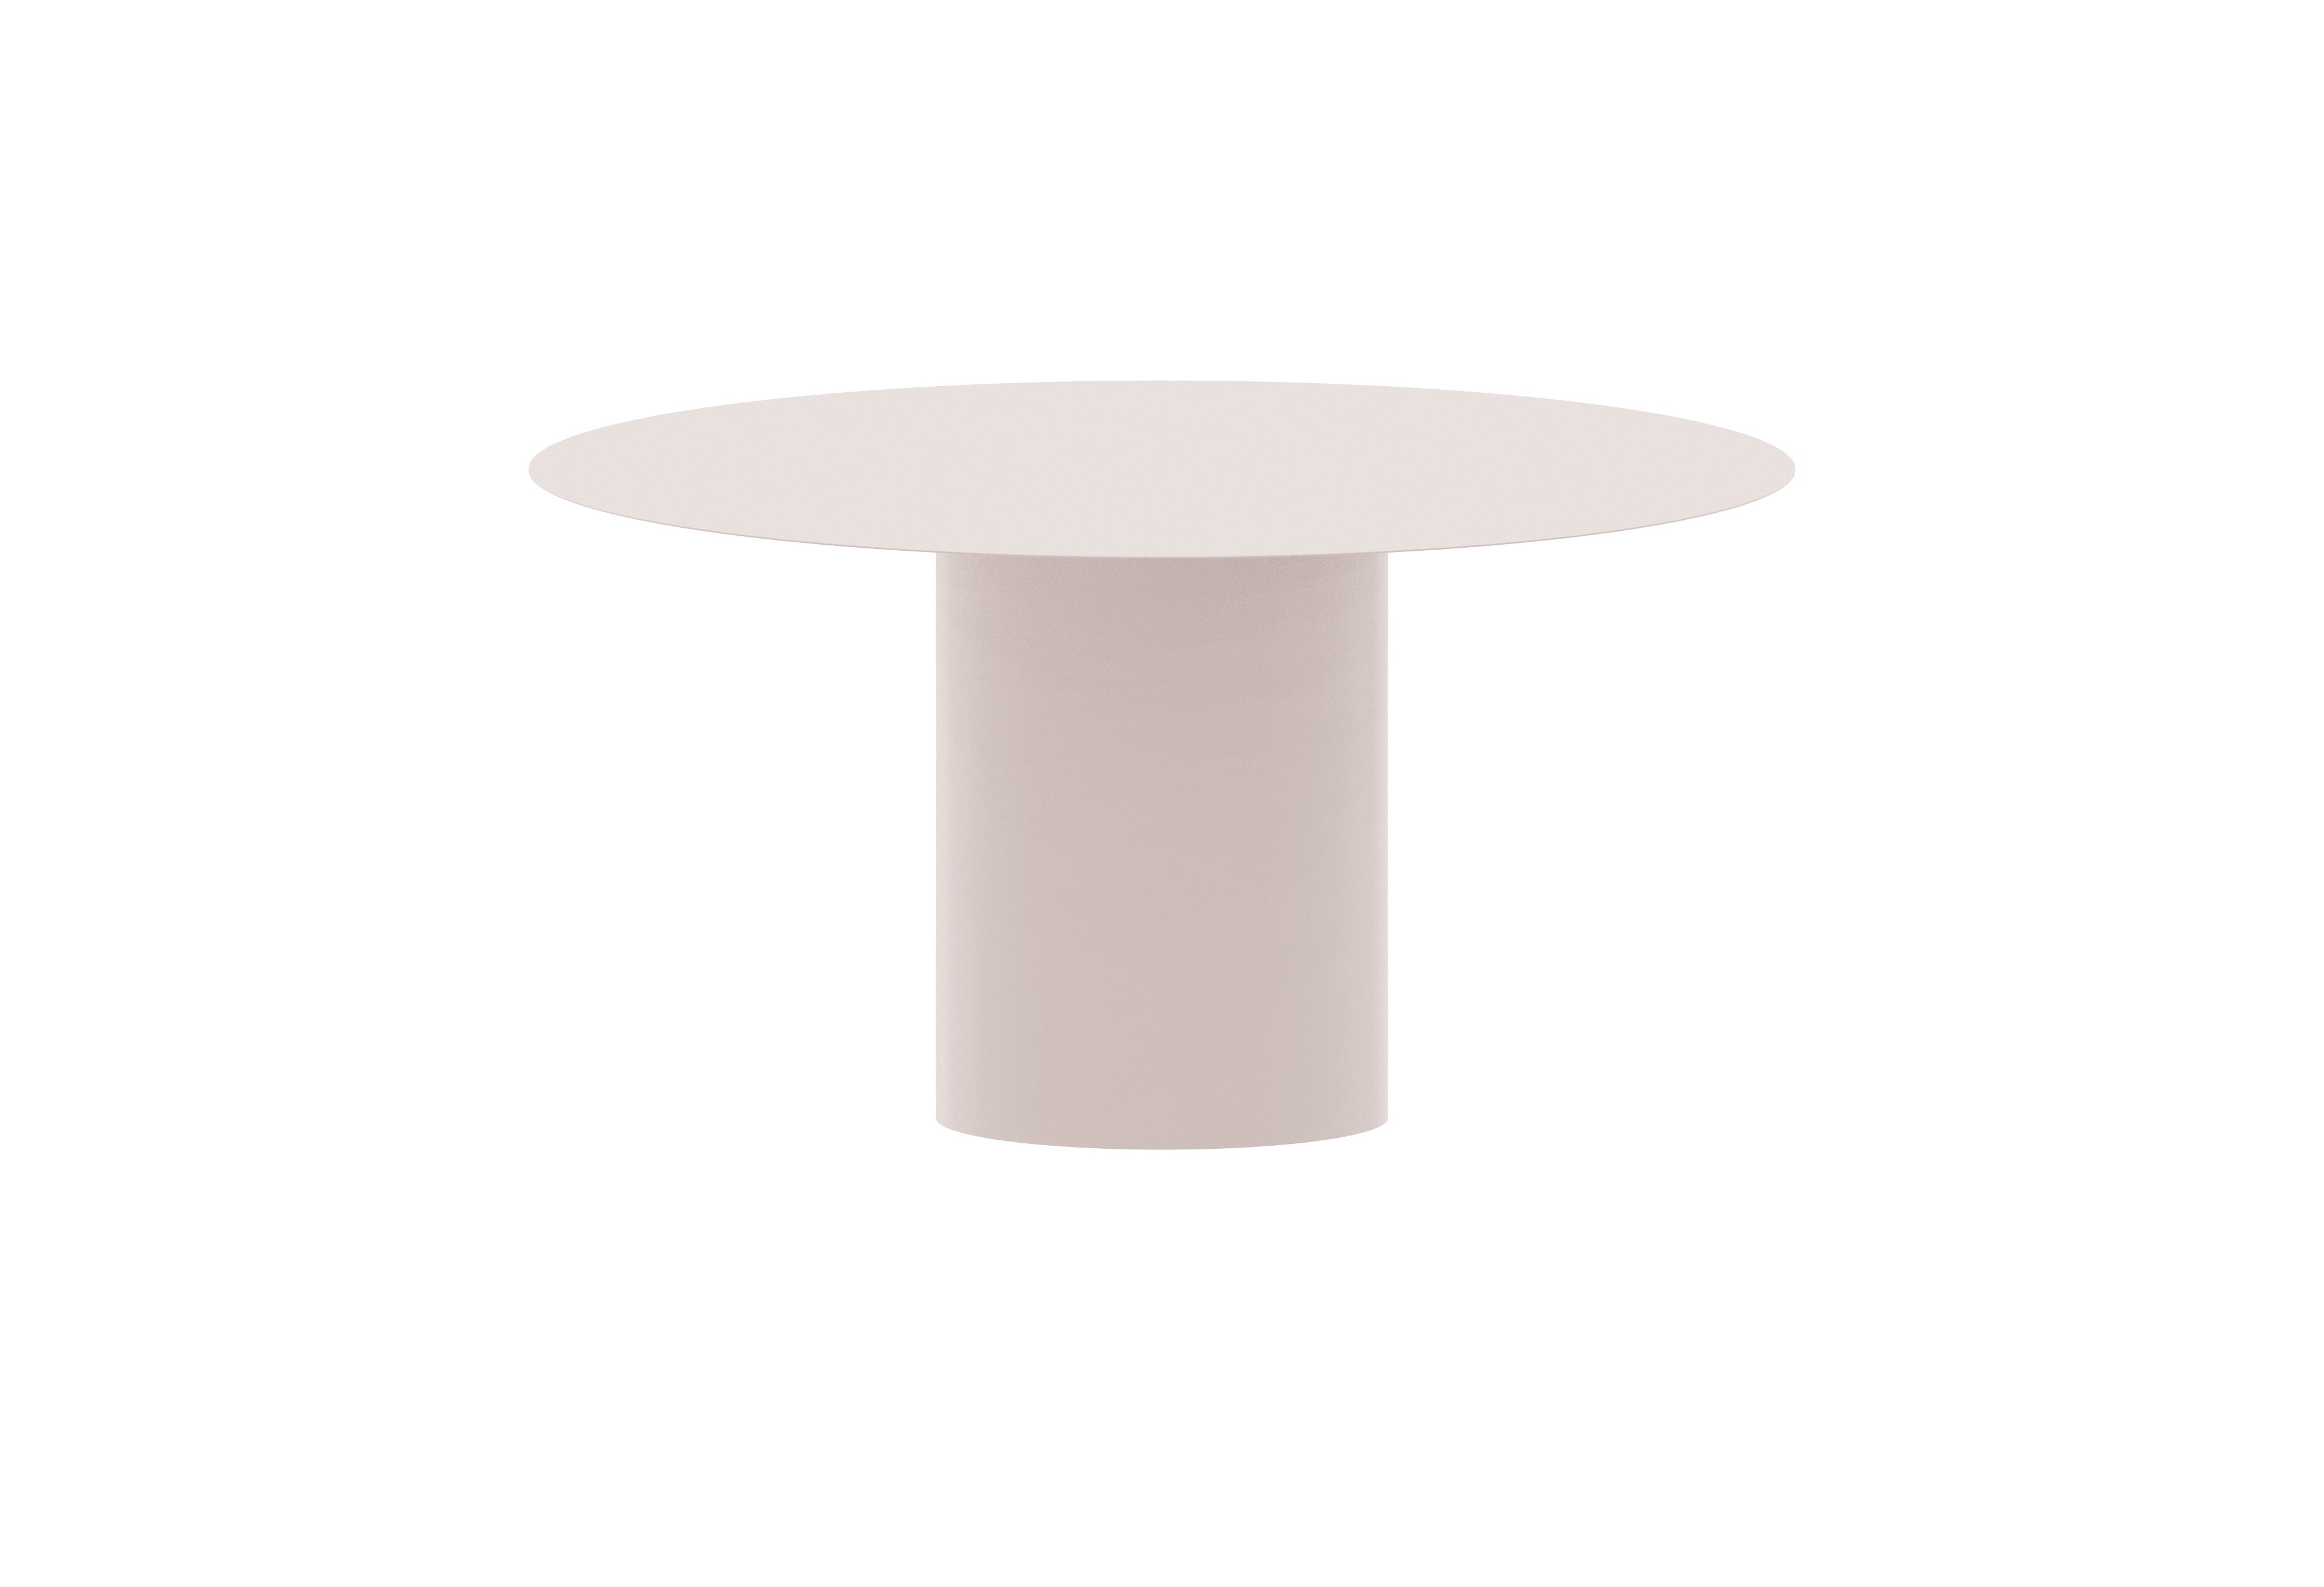 Chiodo 7 - Dining table